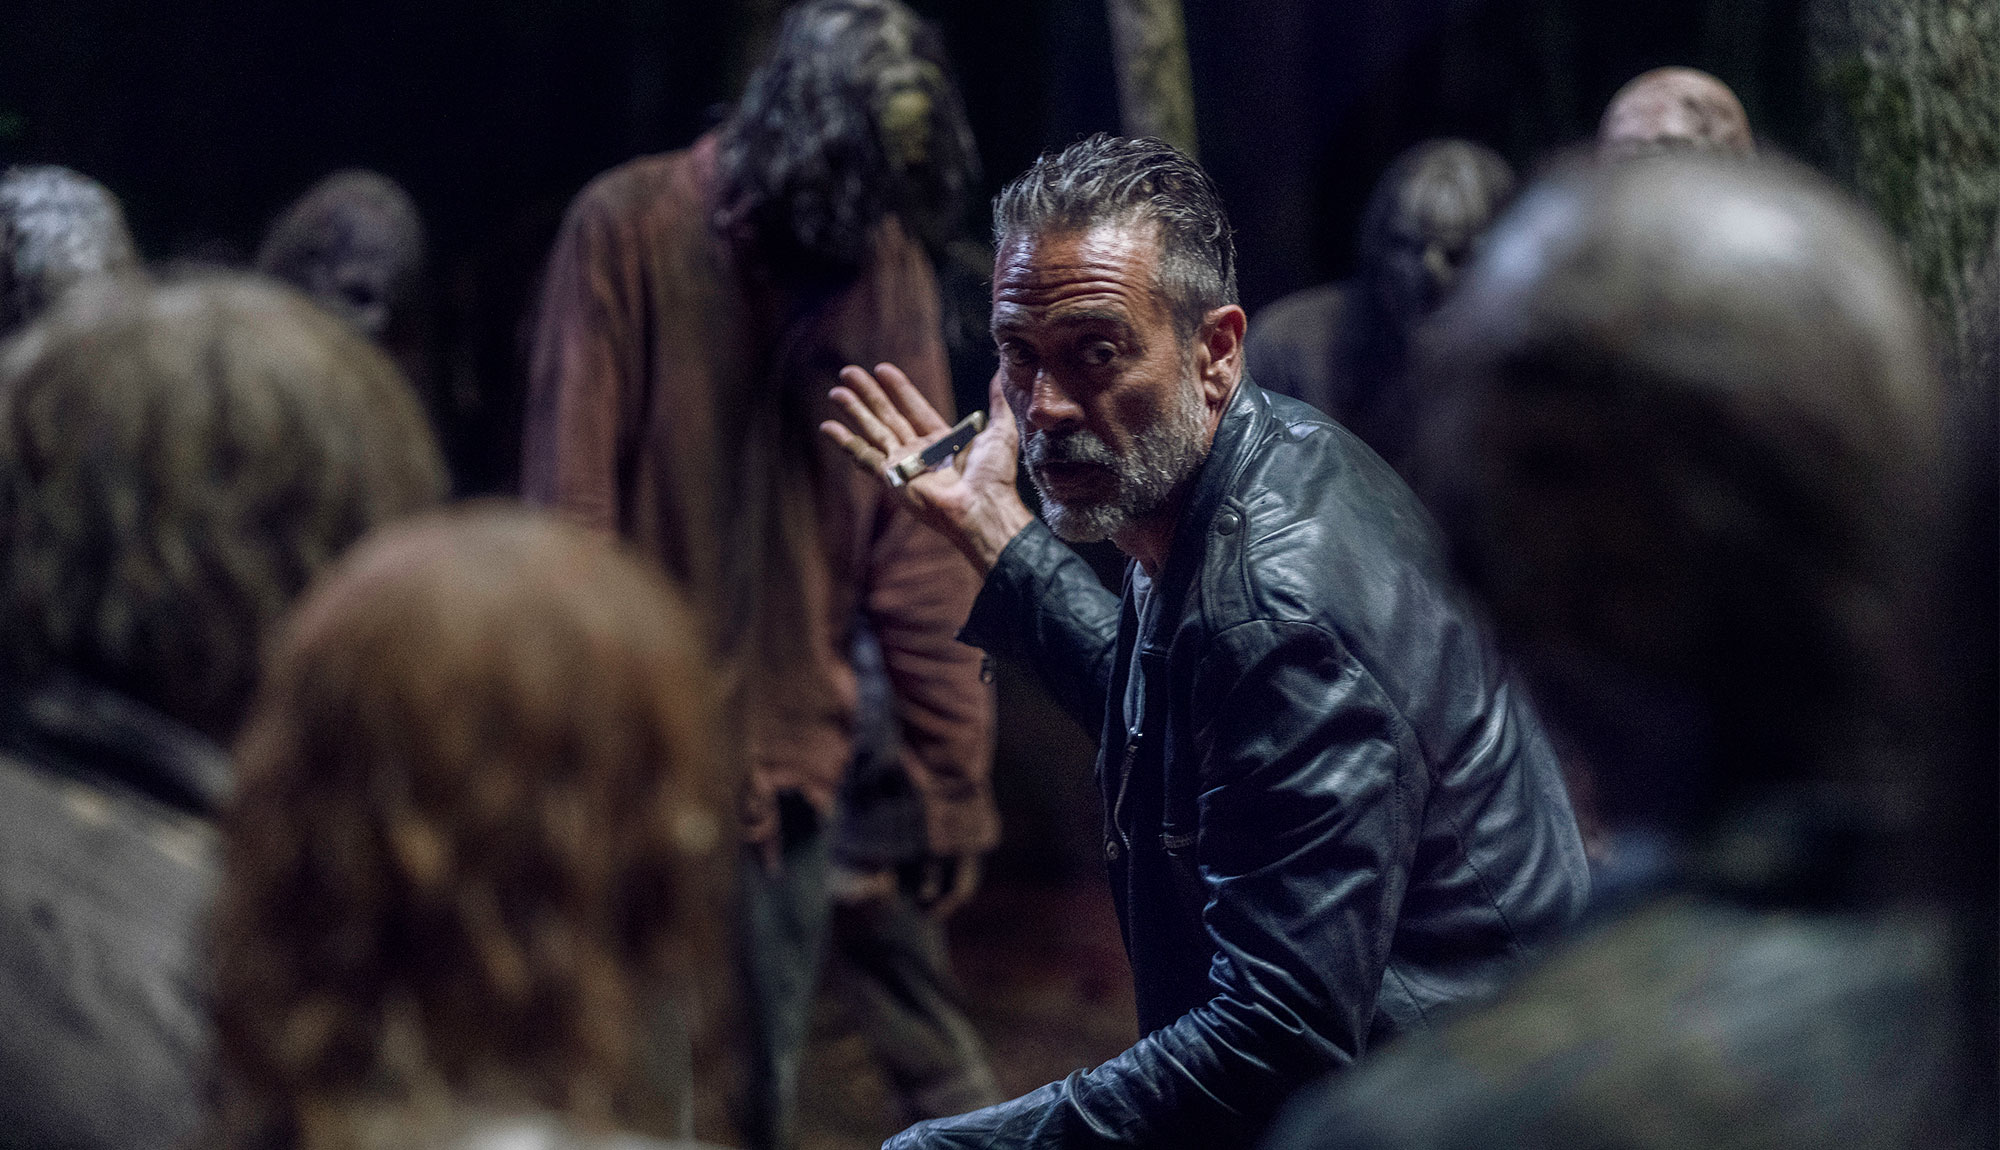 The Best Images From The Walking Dead Episode 1006